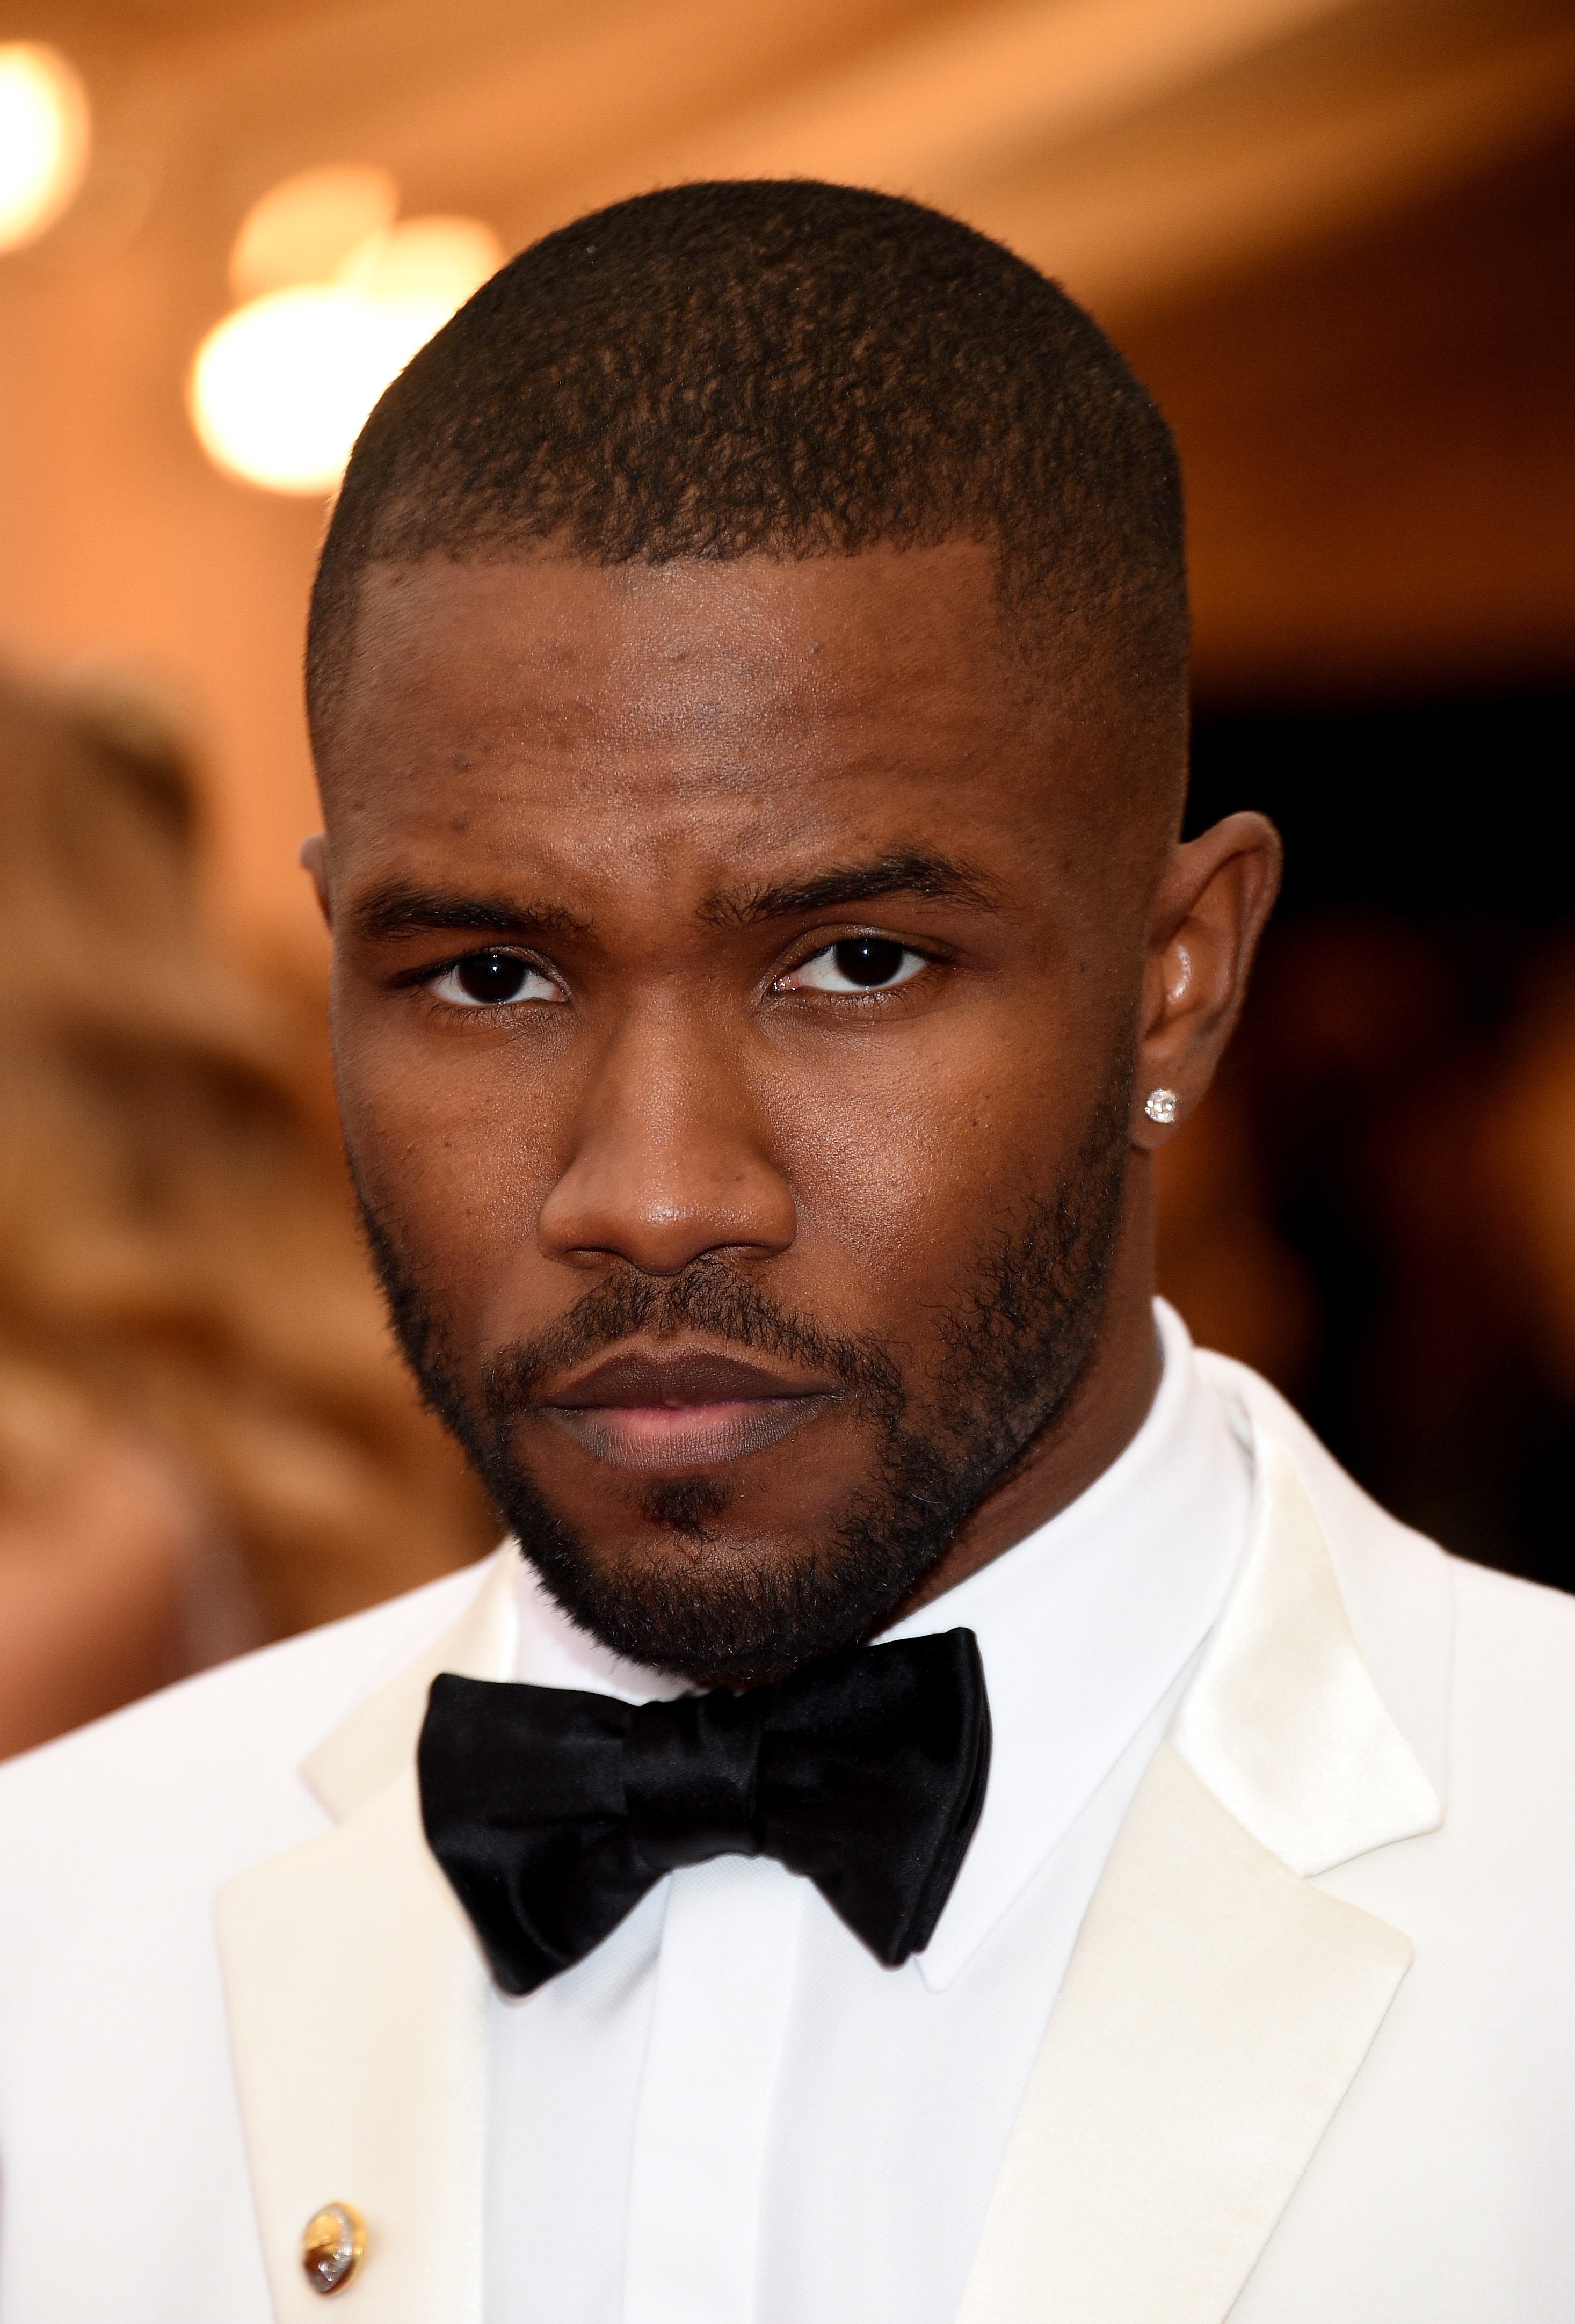 Frank Ocean is photographed at the "Charles James: Beyond Fashion" Costume Institute Gala at the Metropolitan Museum of Art on May 5, 2014, in New York City | Source: Getty Images